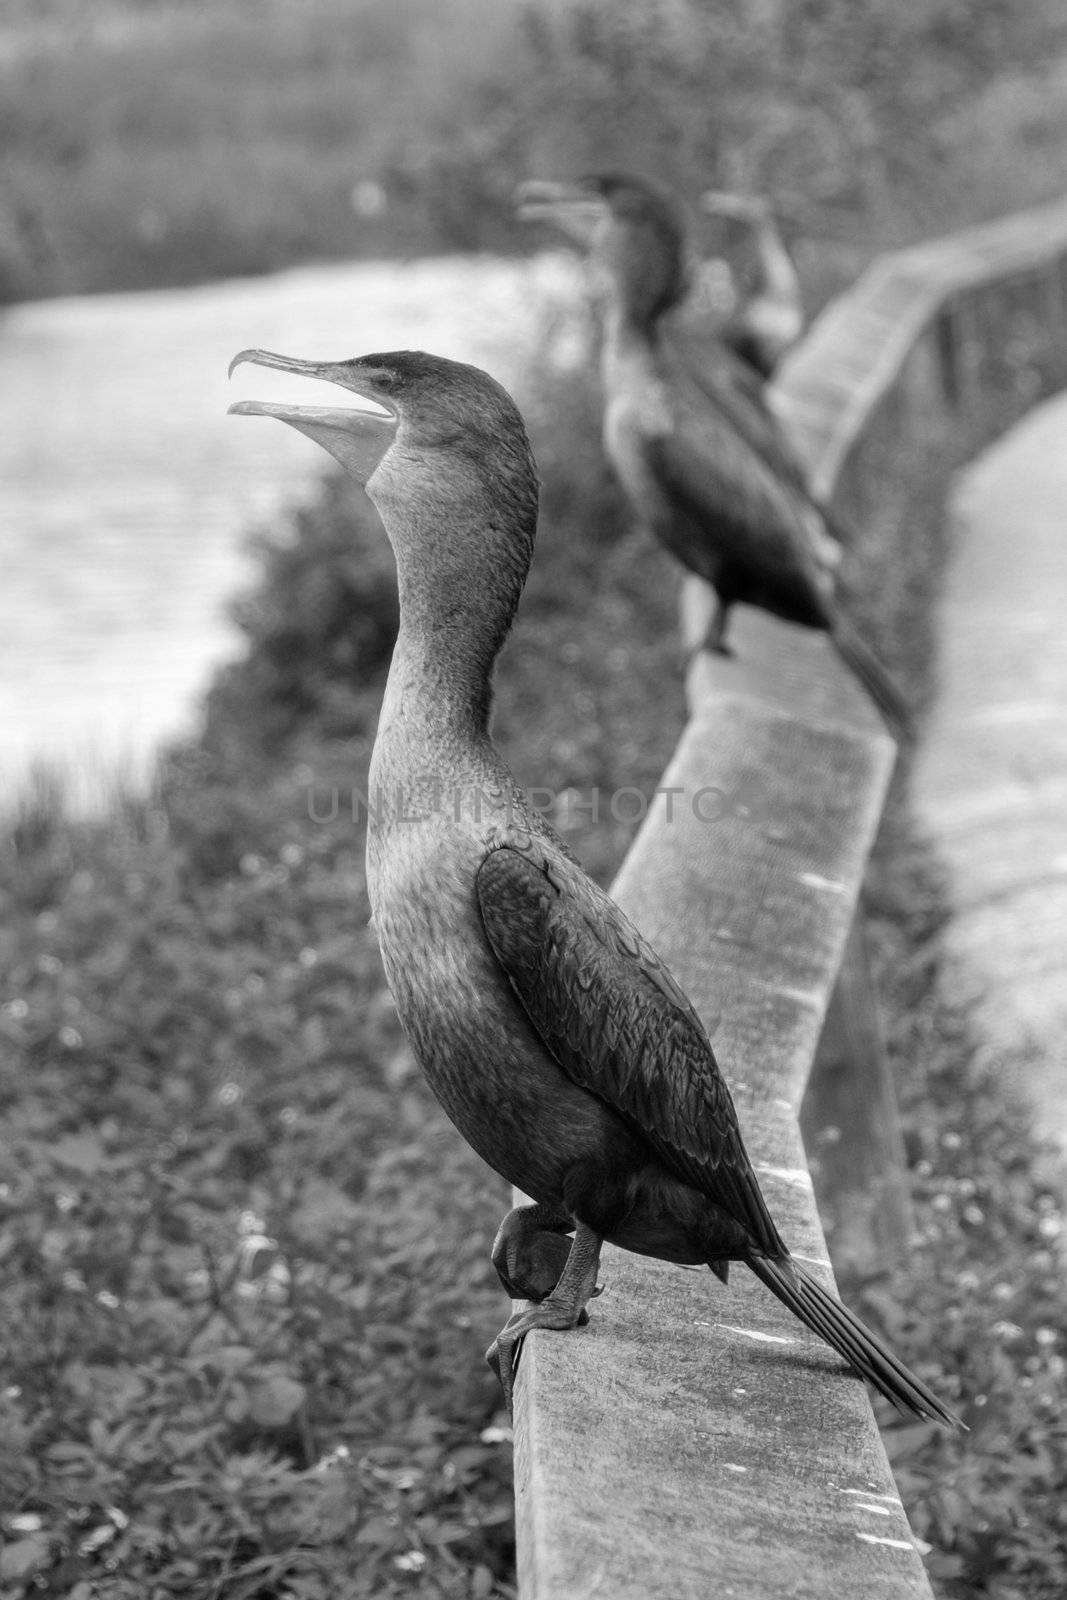 Birds asking for food, Everglades, Florida, January 2007 by jovannig